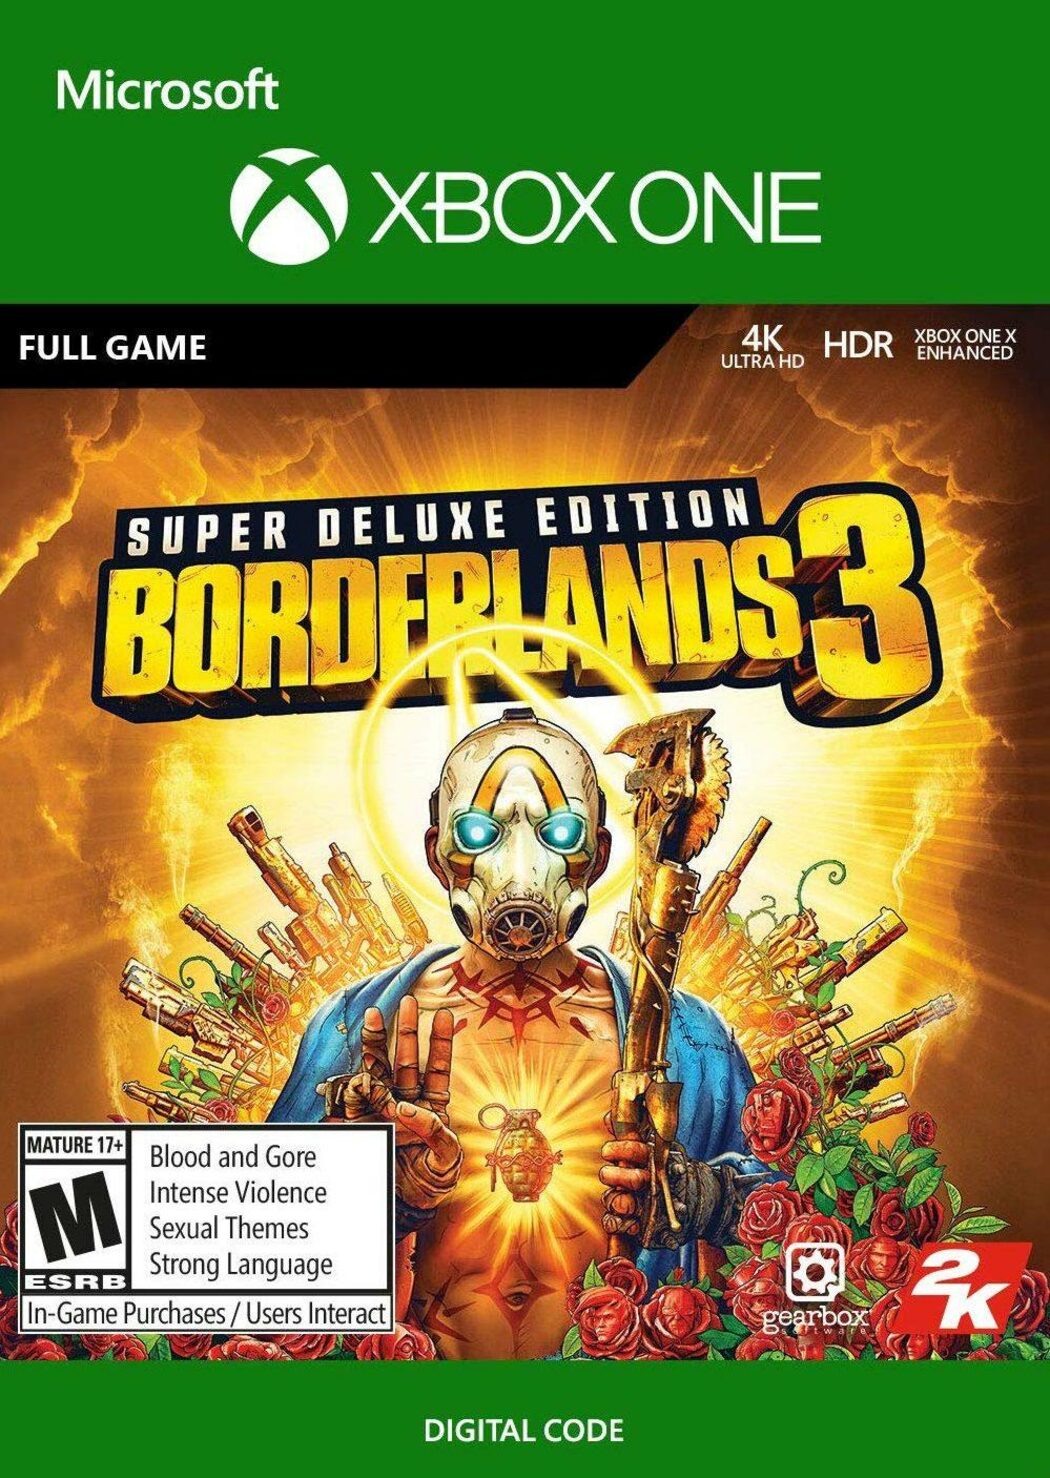 tales from the borderlands xbox one digital code